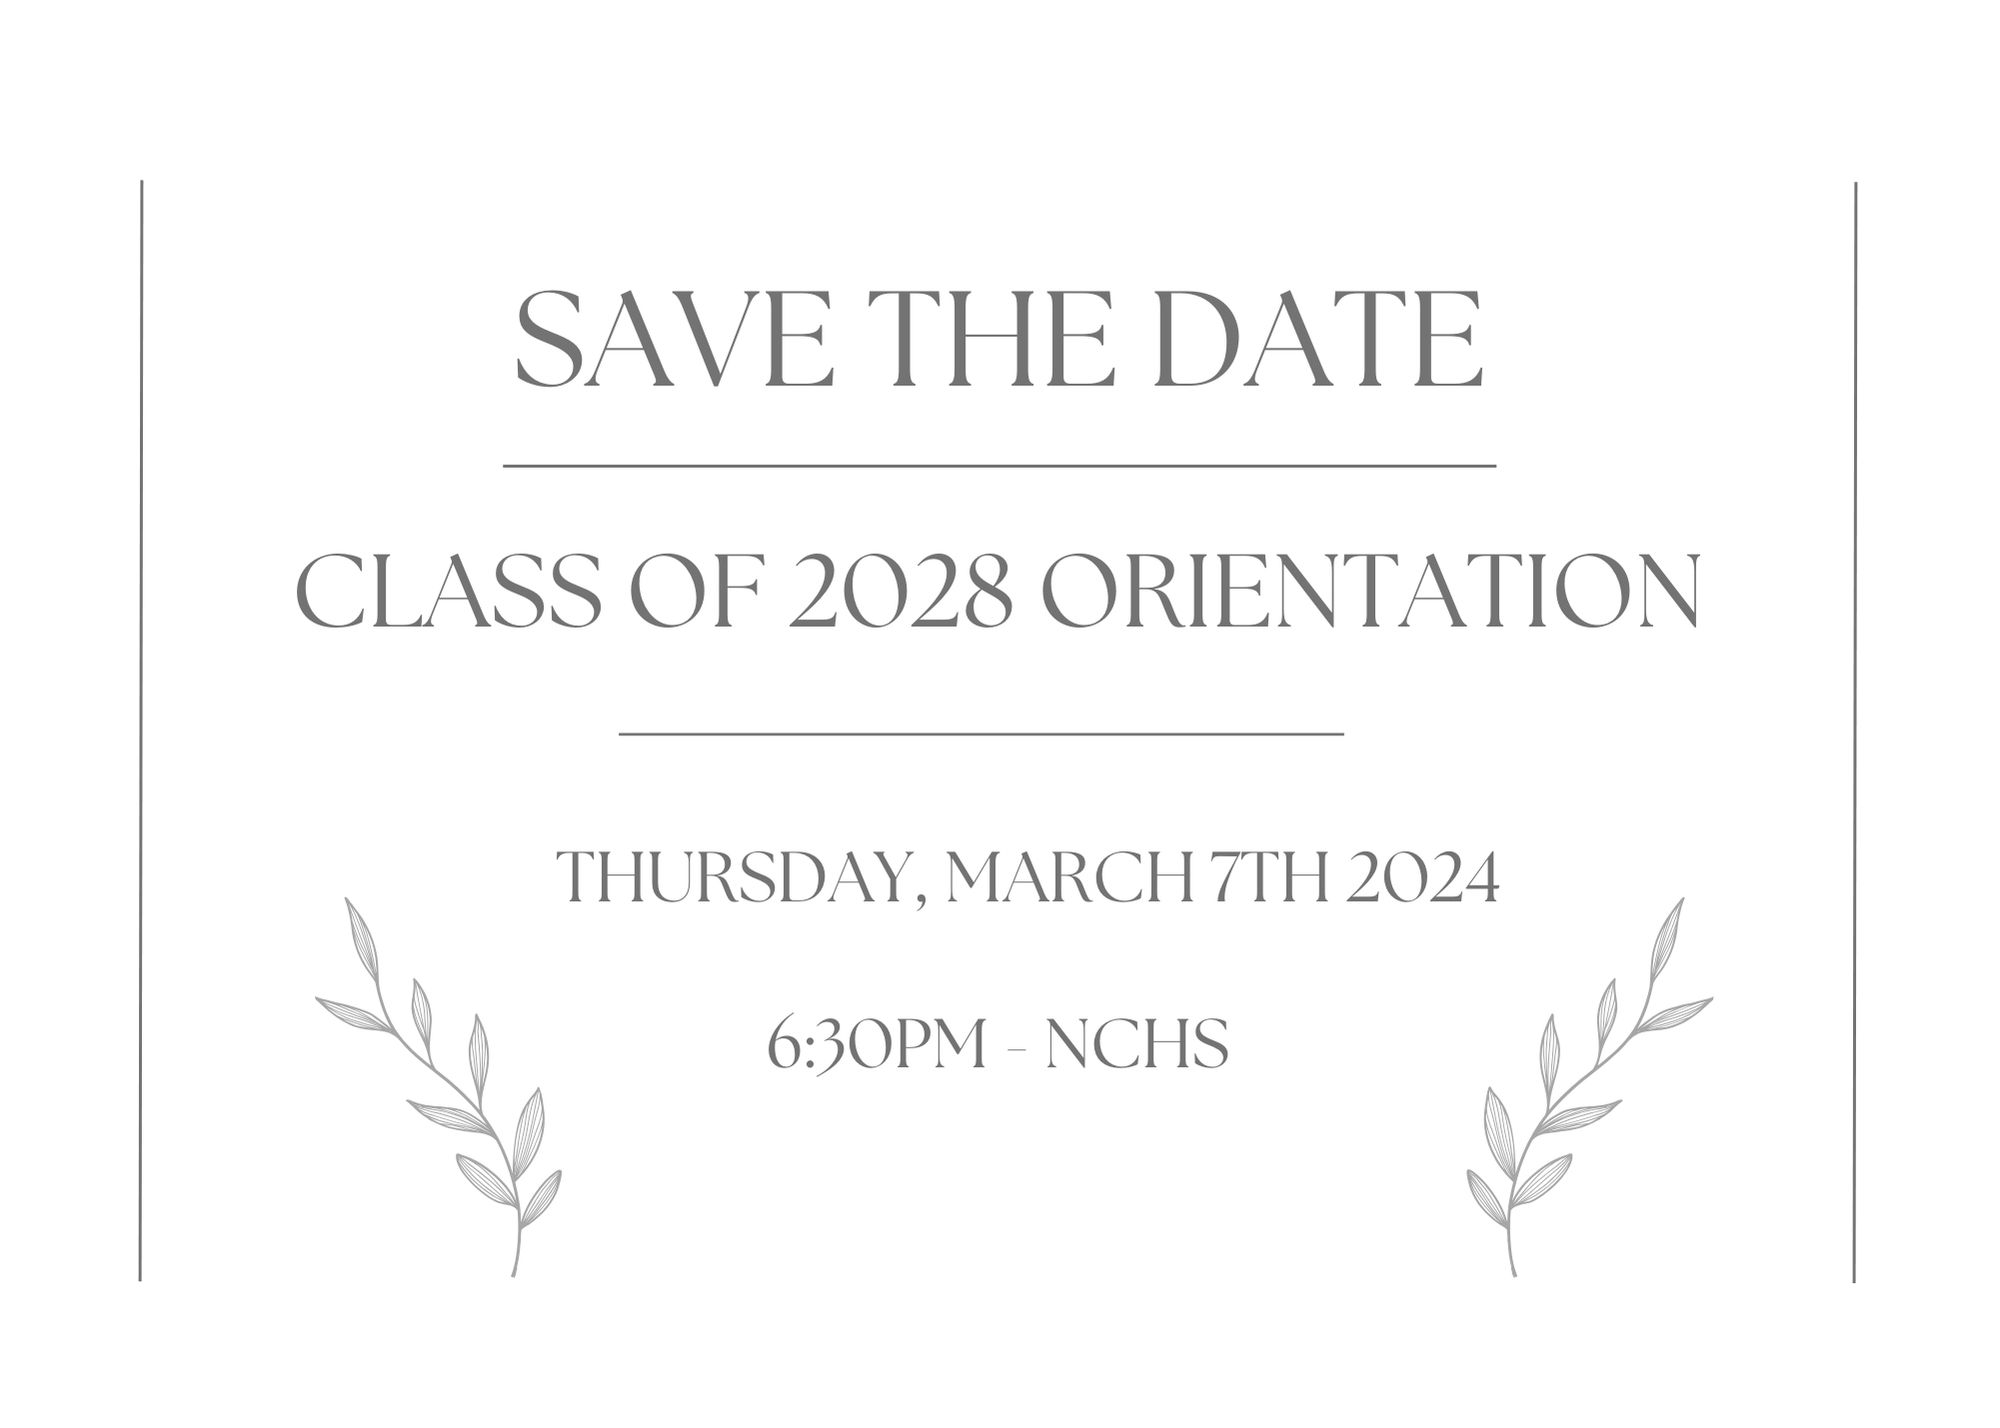 save the date class of 2028 orientation will be on march 7th at 6:30pm at NCHS